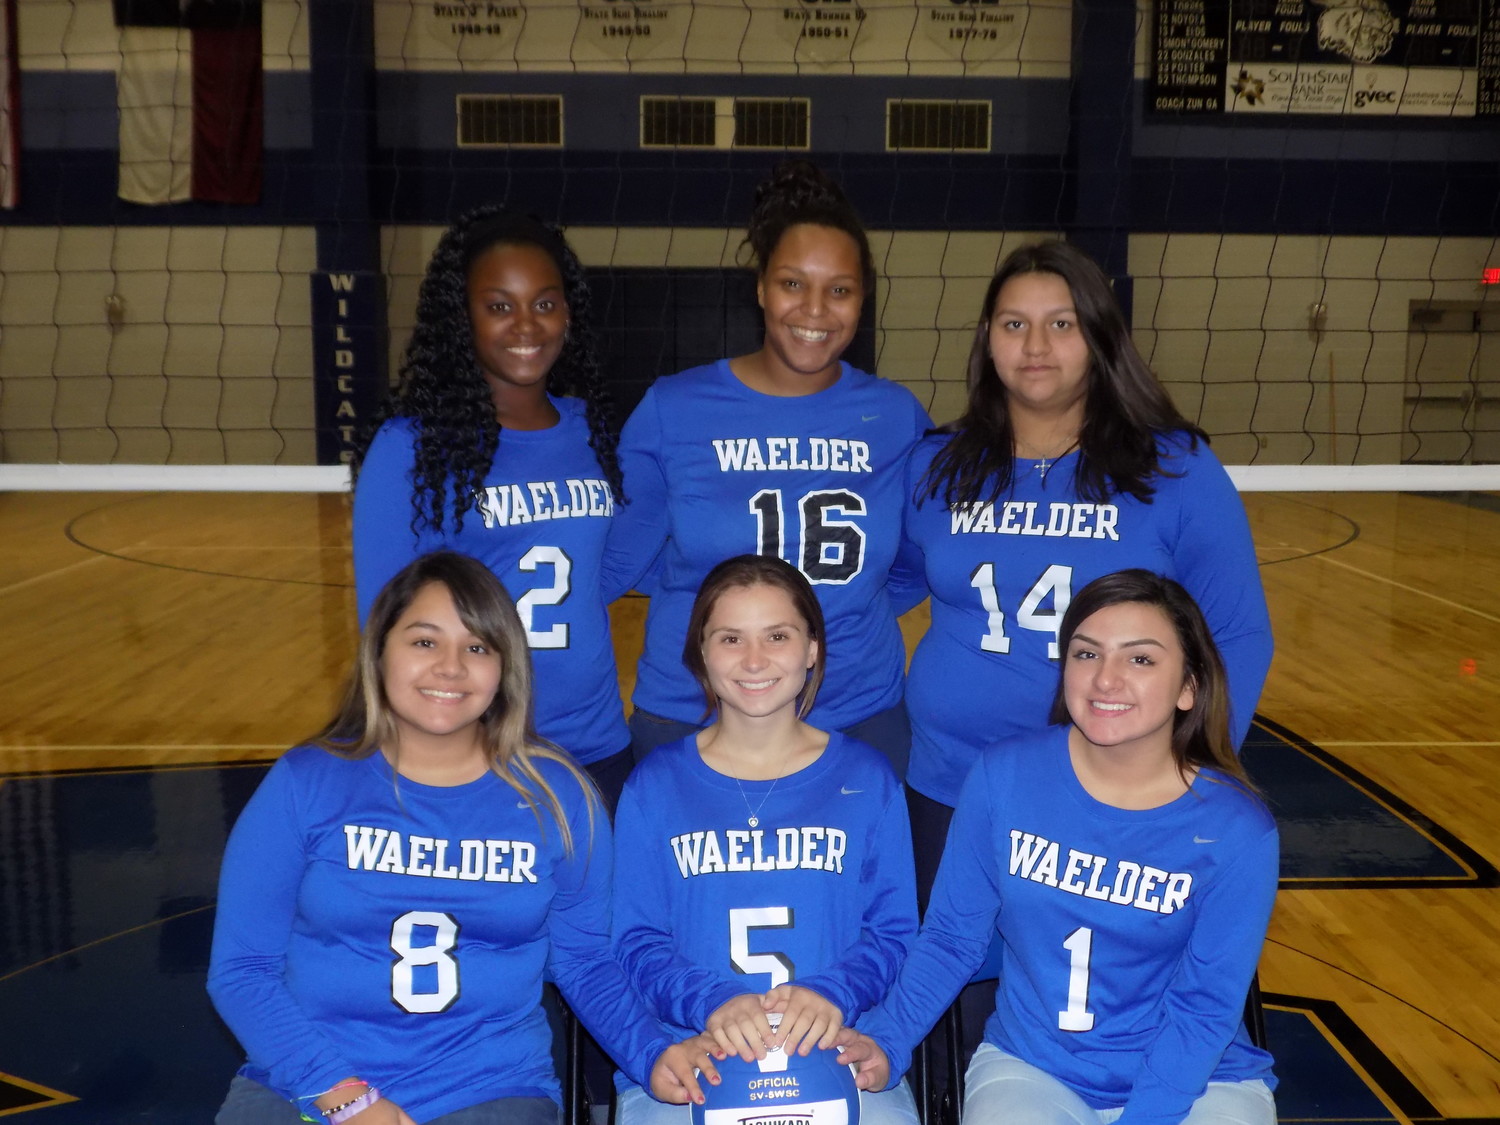 The Waelder Lady Wildcats had an impressive season, coming out of District 26-1A as champions. Many athletes won all-district honors. Pictured is the junior varsity team.